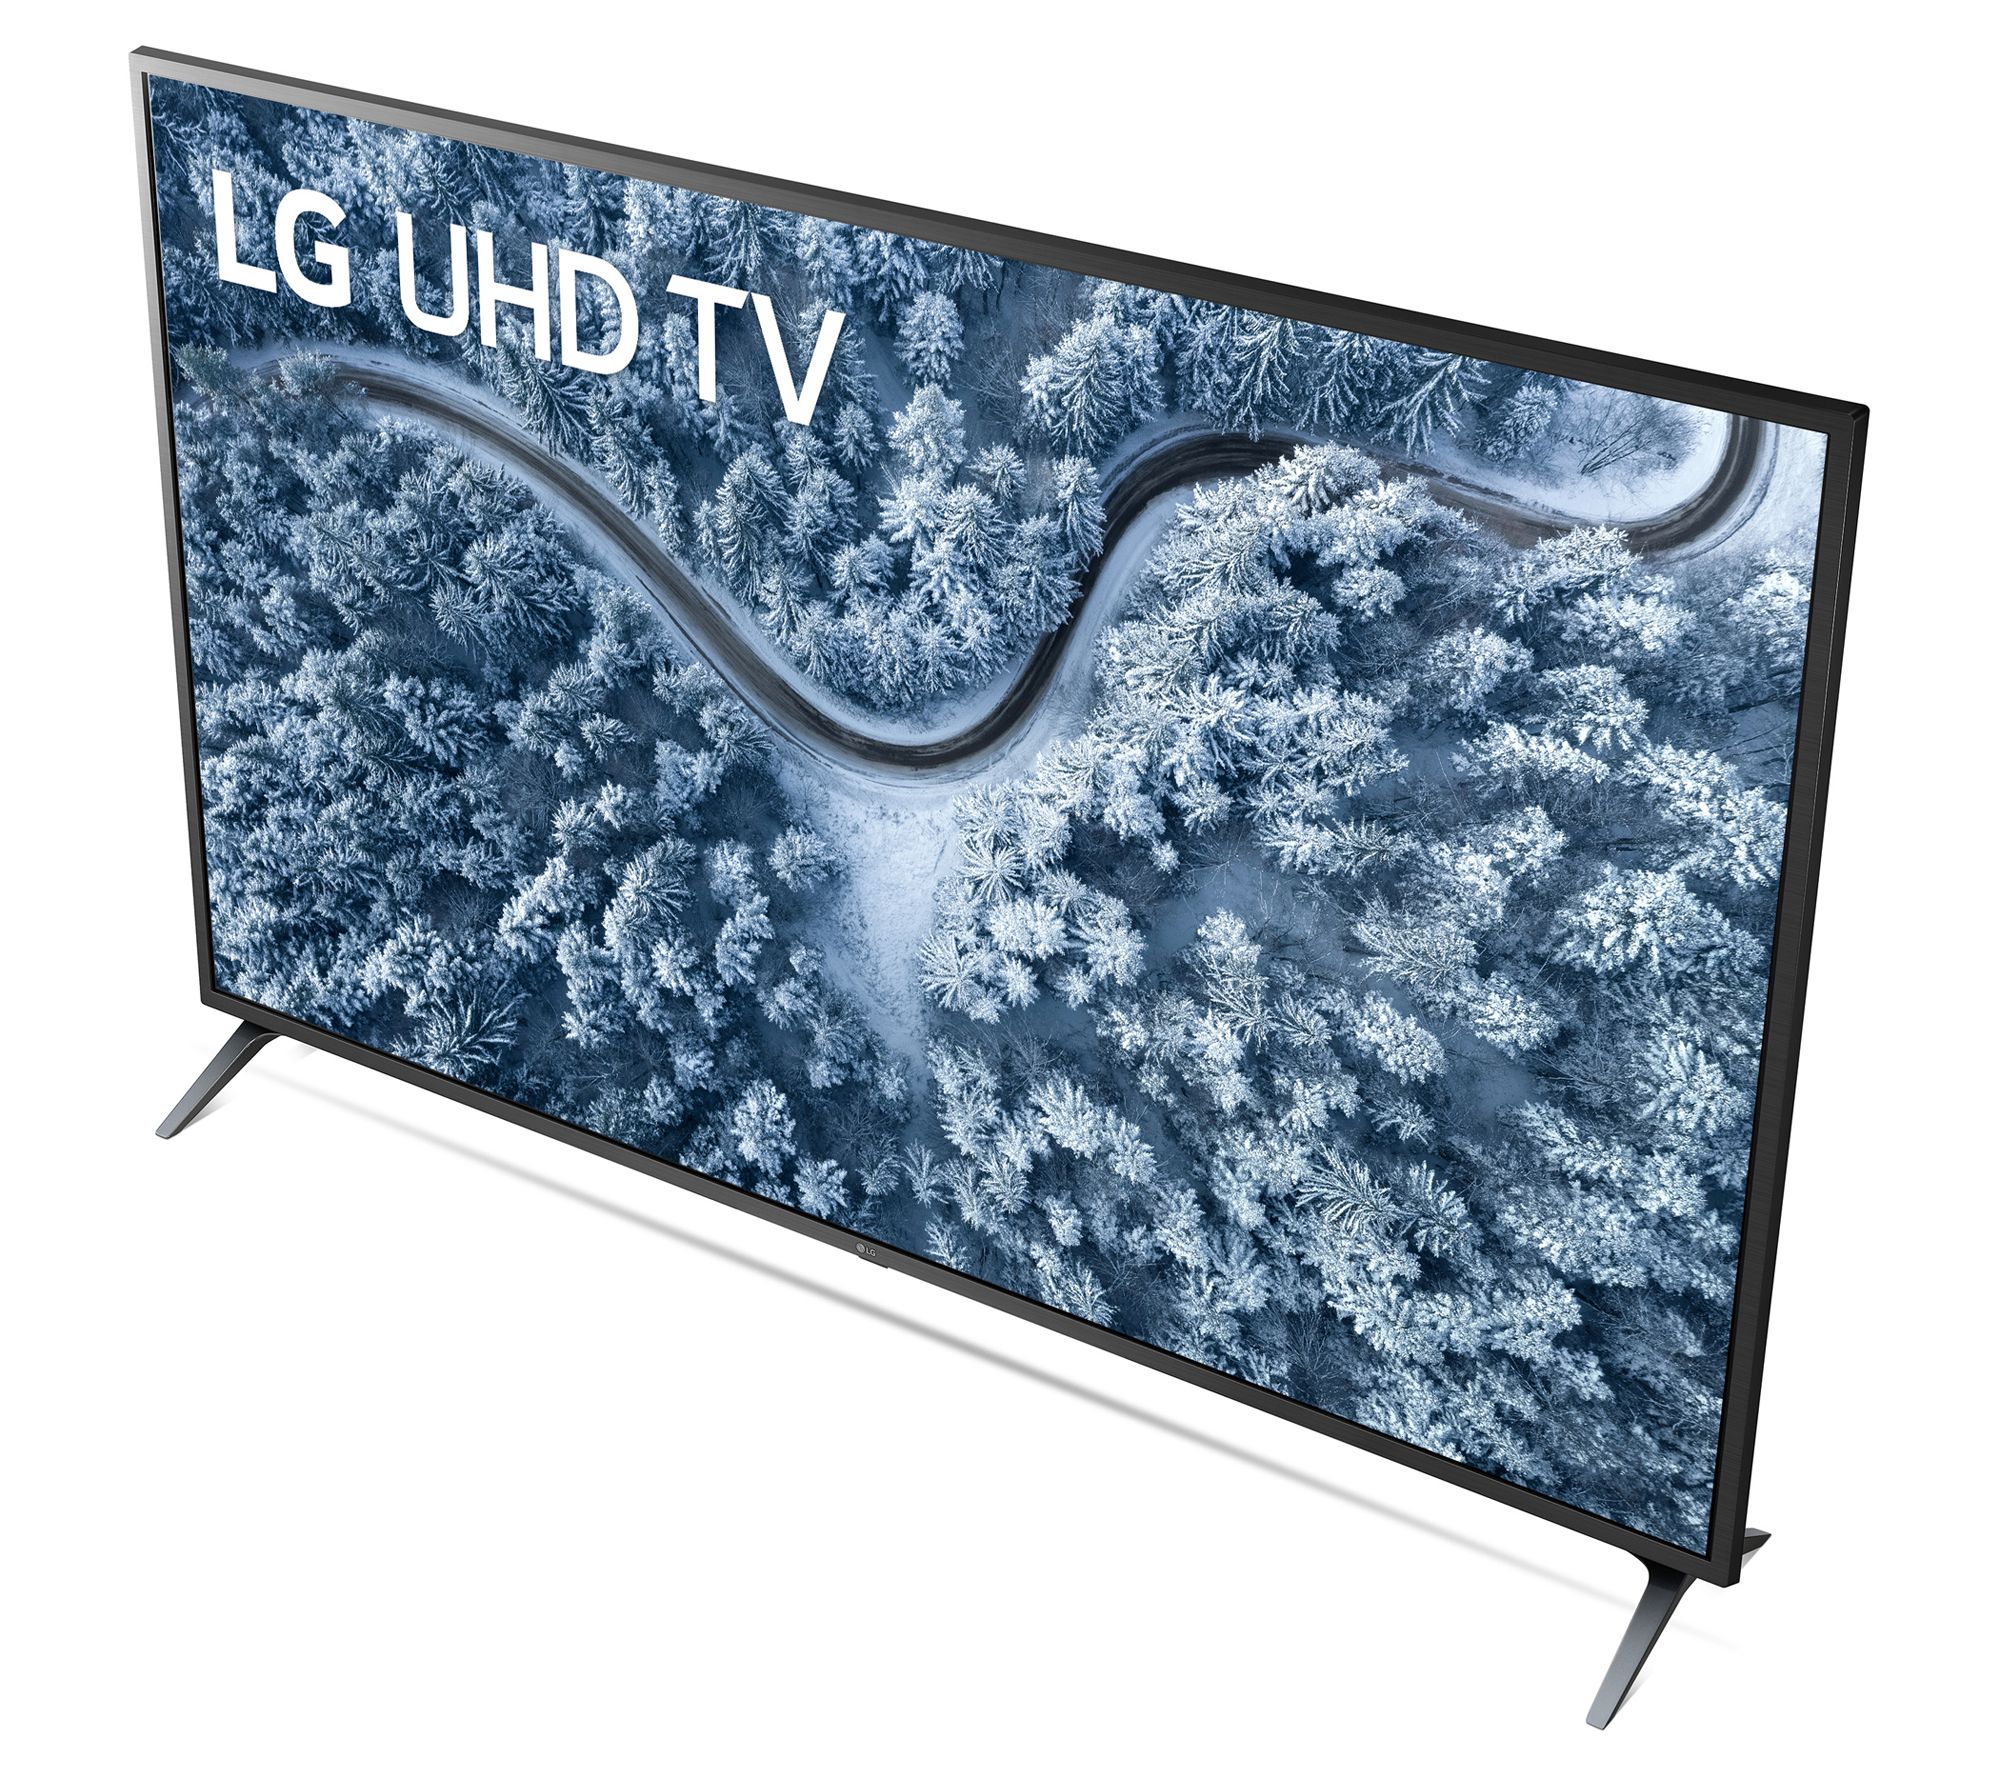 LG 65 Smart LED 4K Ultra HDTV with Active HDR on QVC 